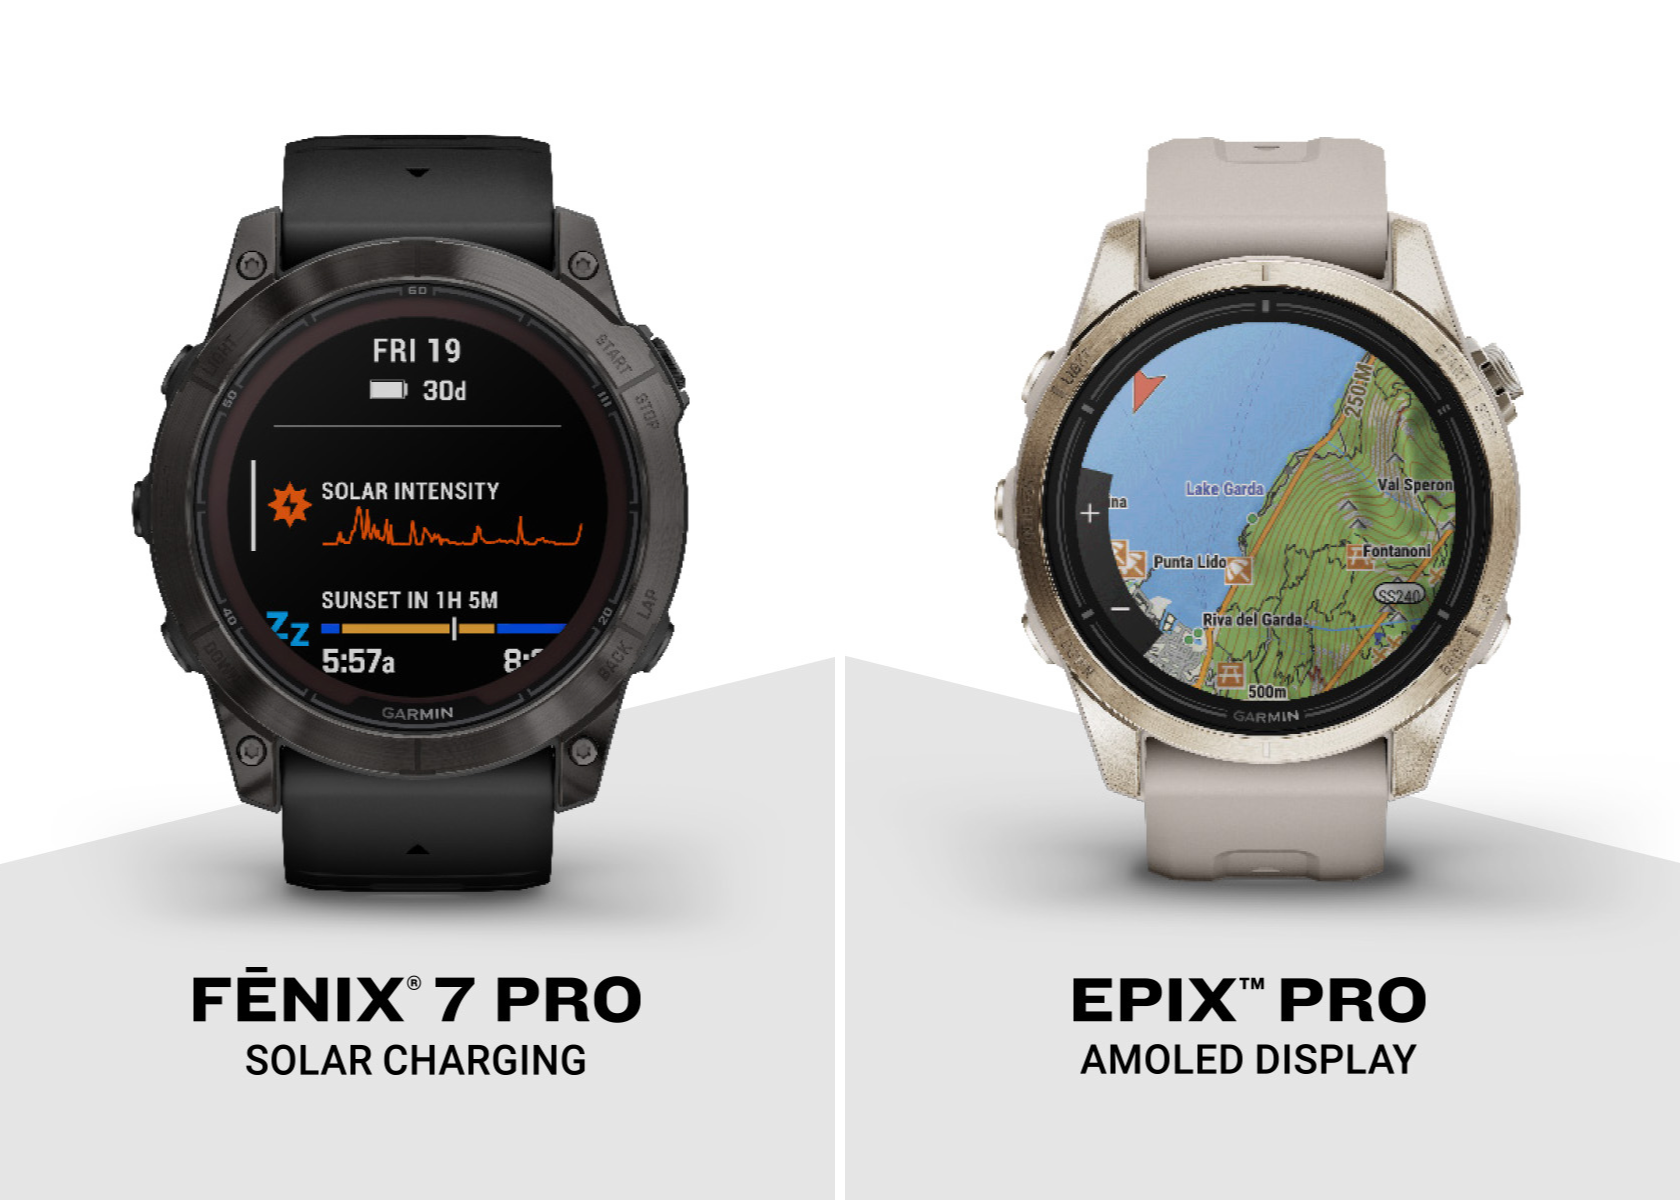 What's New for the Garmin Fenix 7 Pro Smartwatches?